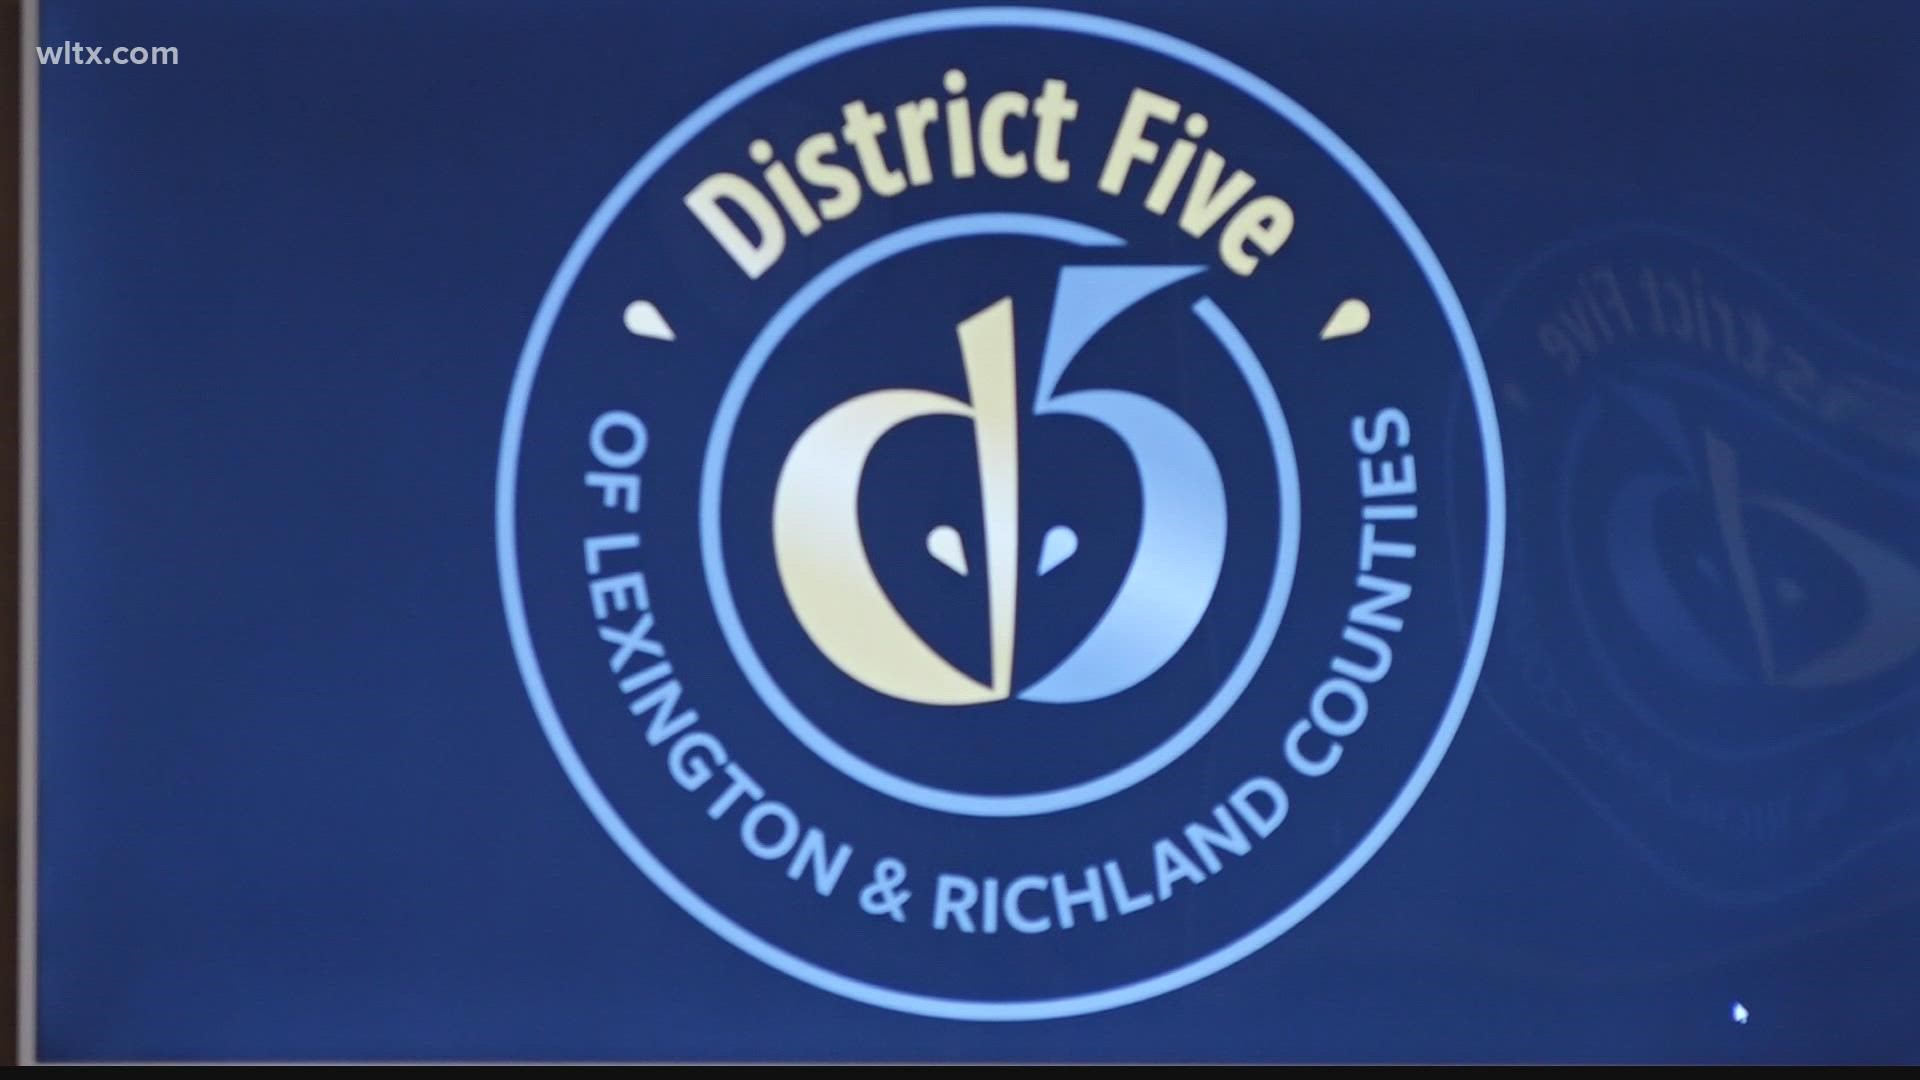 Three candidates are vying for a seat on Lexington-Richland District Five's school board in the Oct. 12 election.